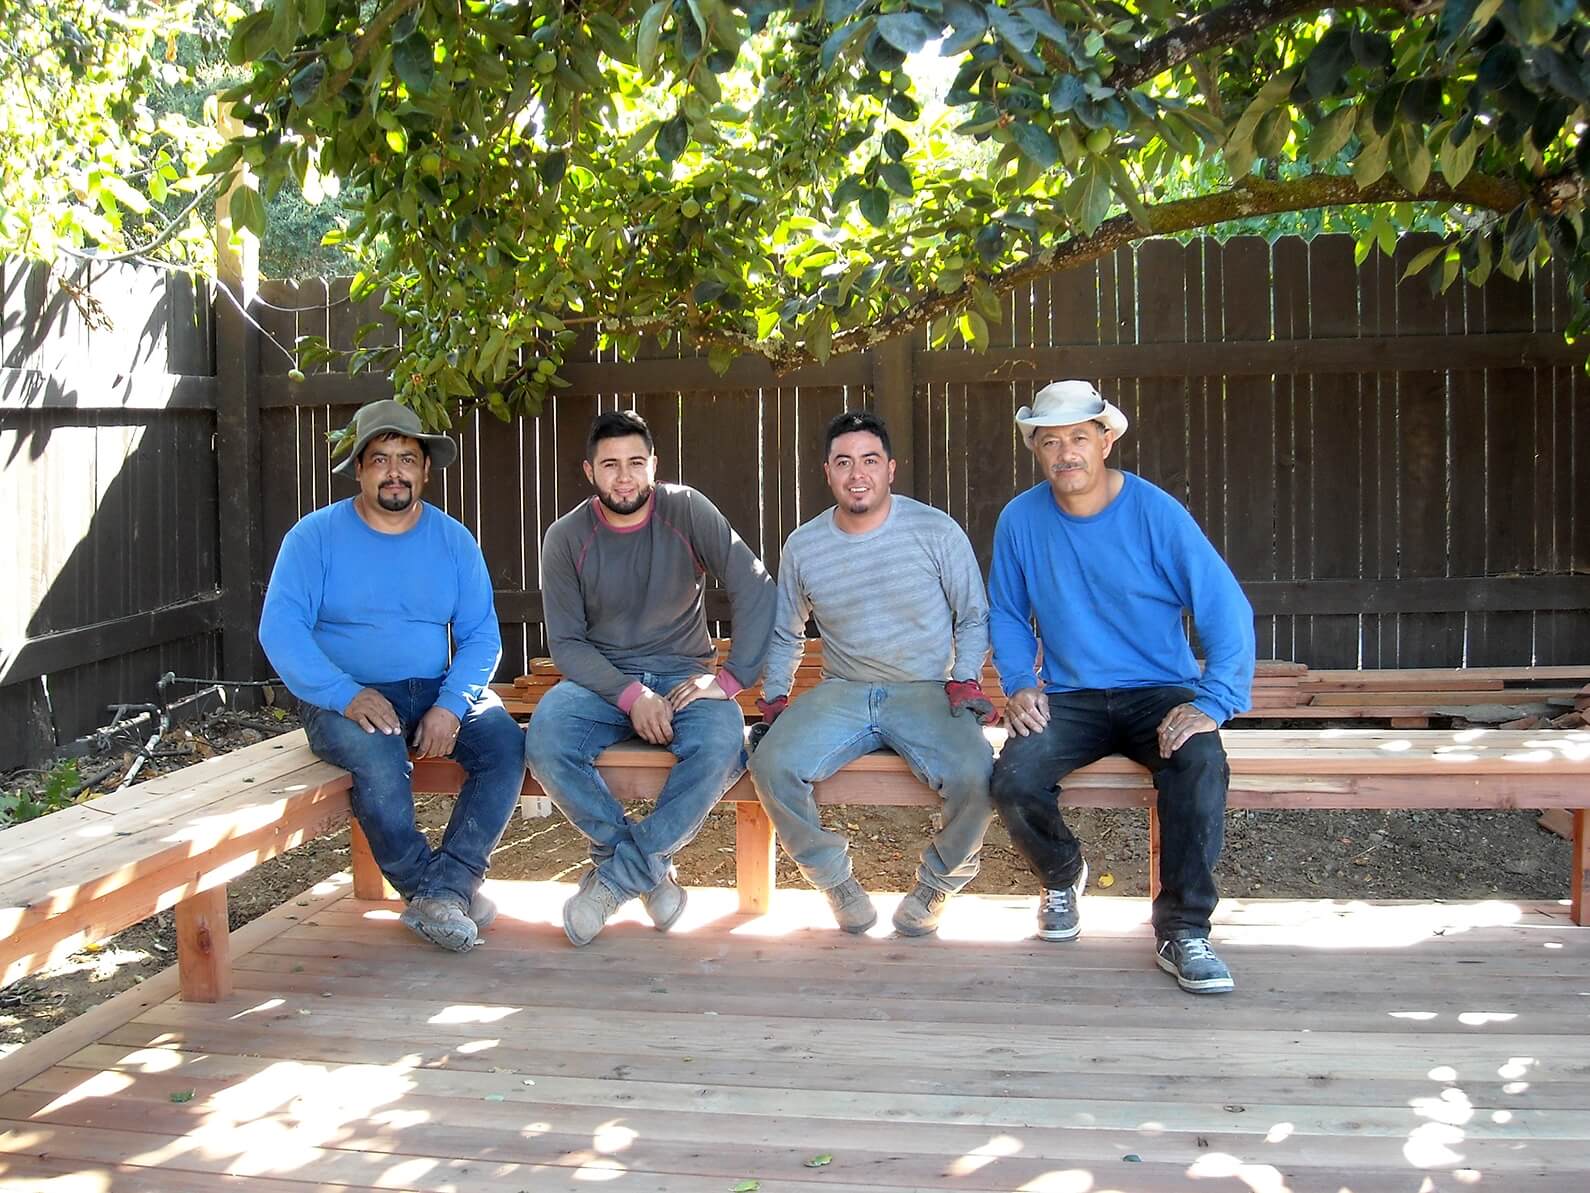 Sept 2019.  Nelson and his crew on the beautiful deck they built!